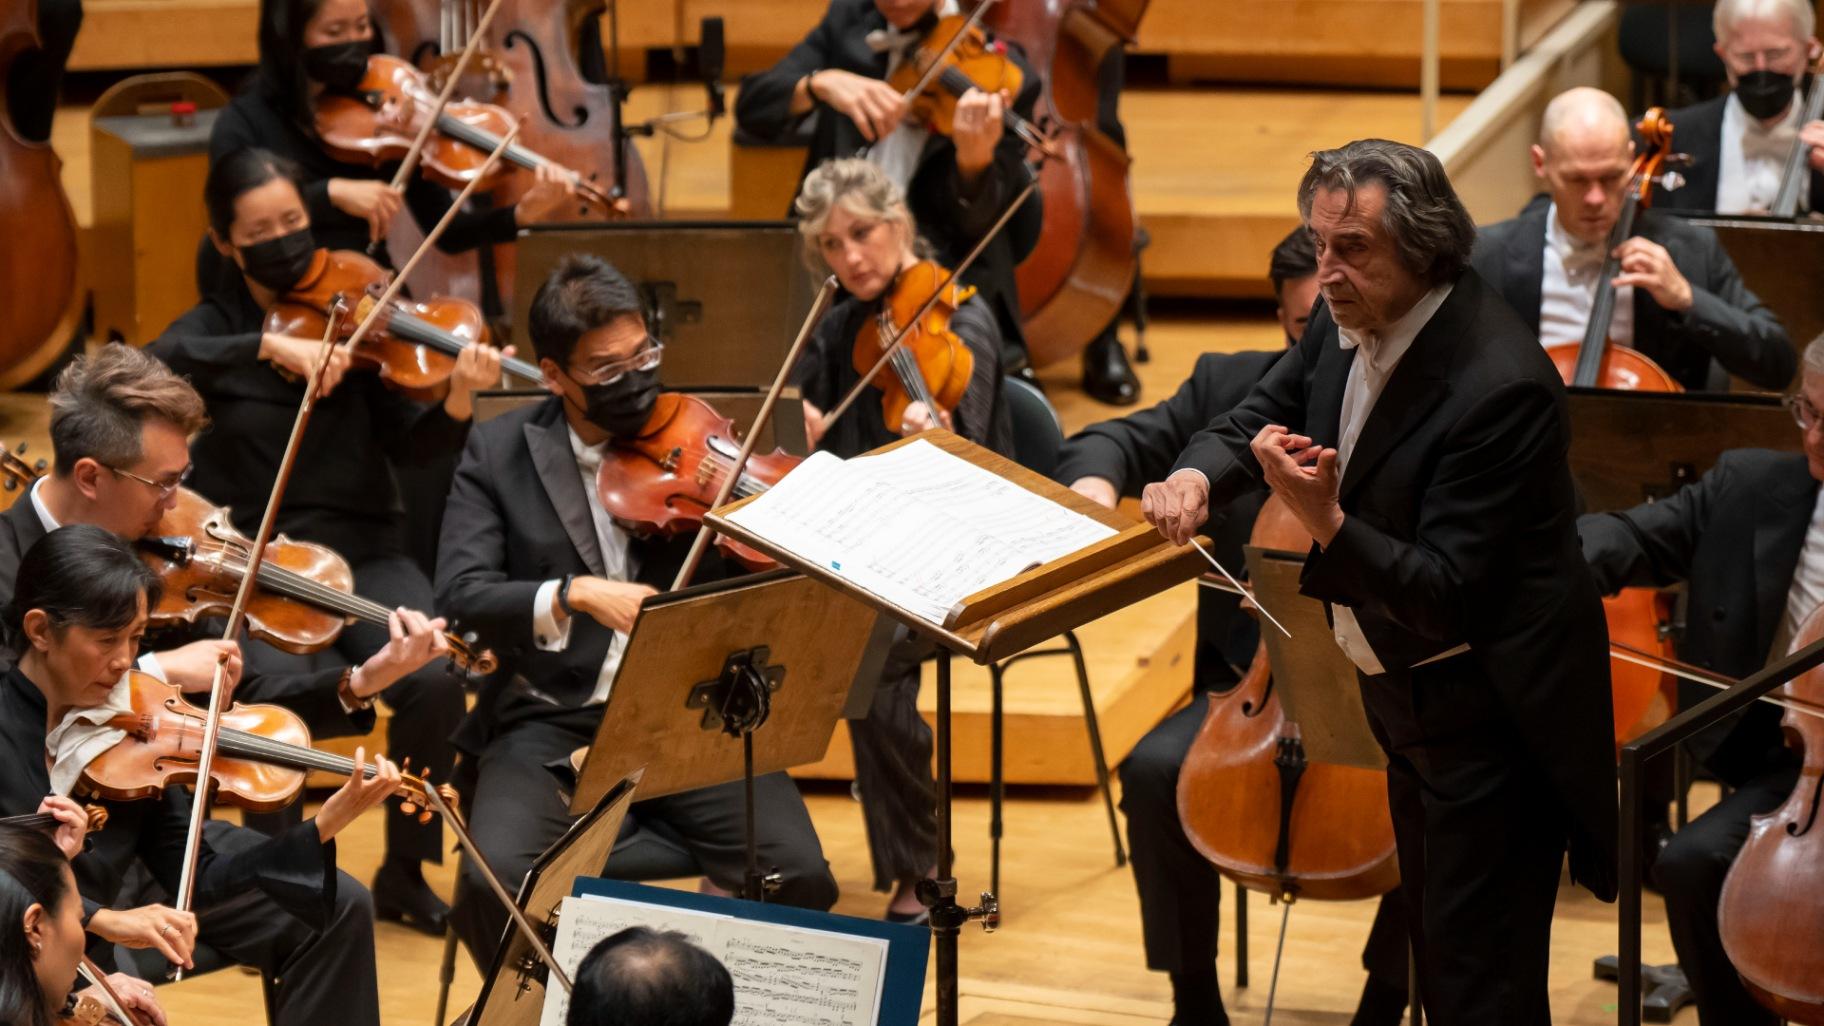 Music Director Riccardo Muti leads the CSO in a program of works by Rossini, Mozart and Prokofiev on Sept. 29, 2022. (Credit: Todd Rosenberg)